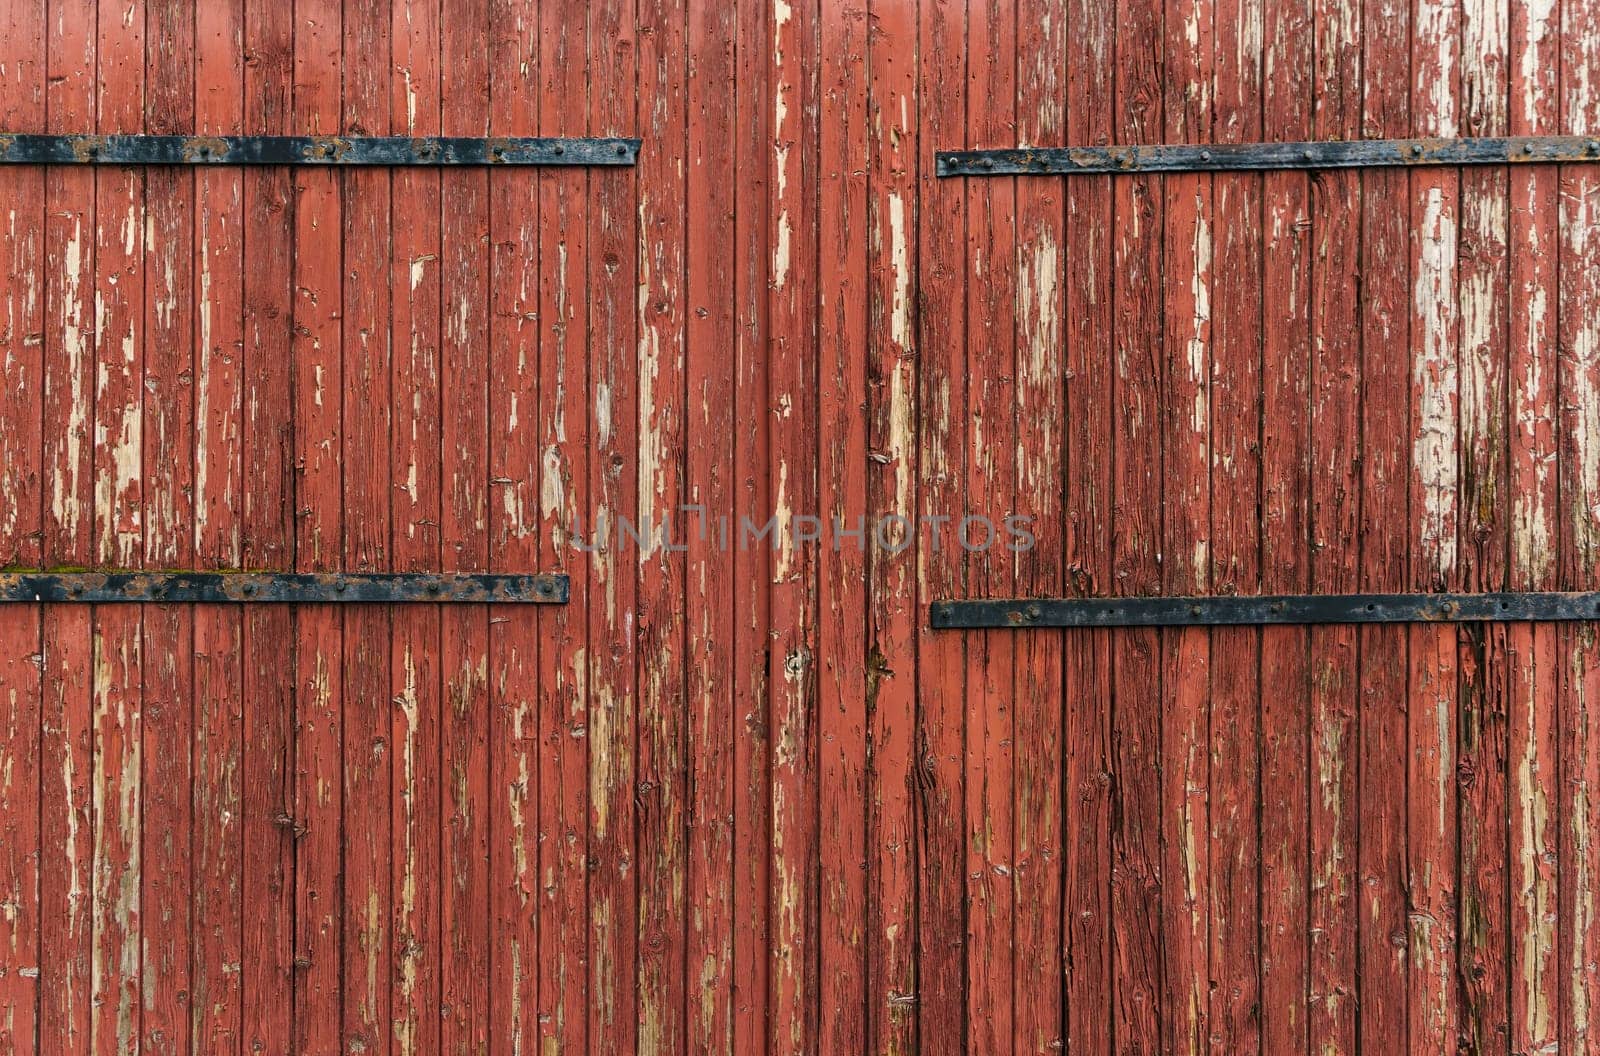 Detail of antique wooden door in red tones, with lots of texture and pickled paint. Concept for backgrounds and textures.